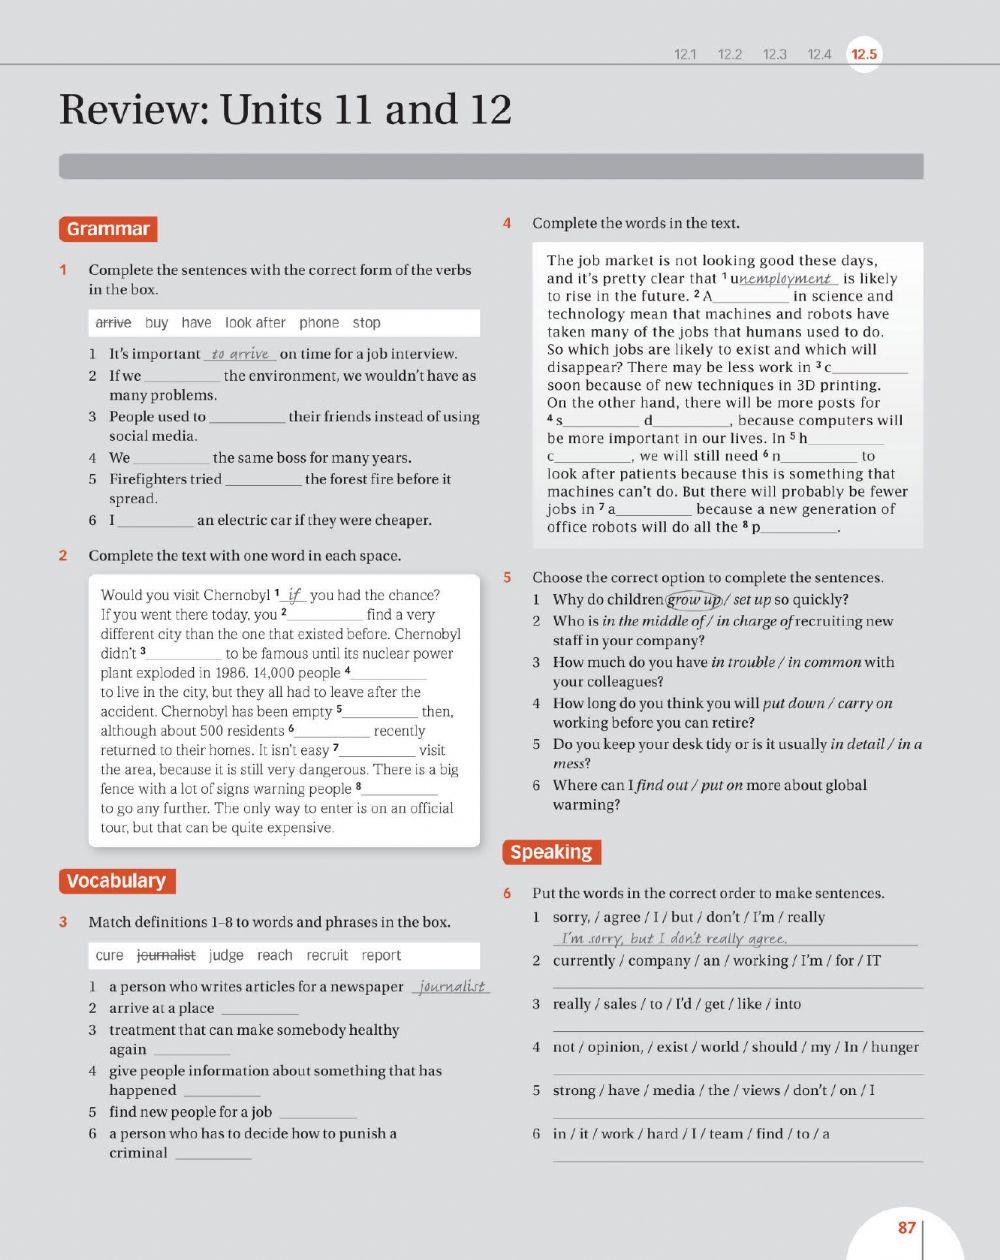 Navigate B1+ Workbook Pages 87 and 88